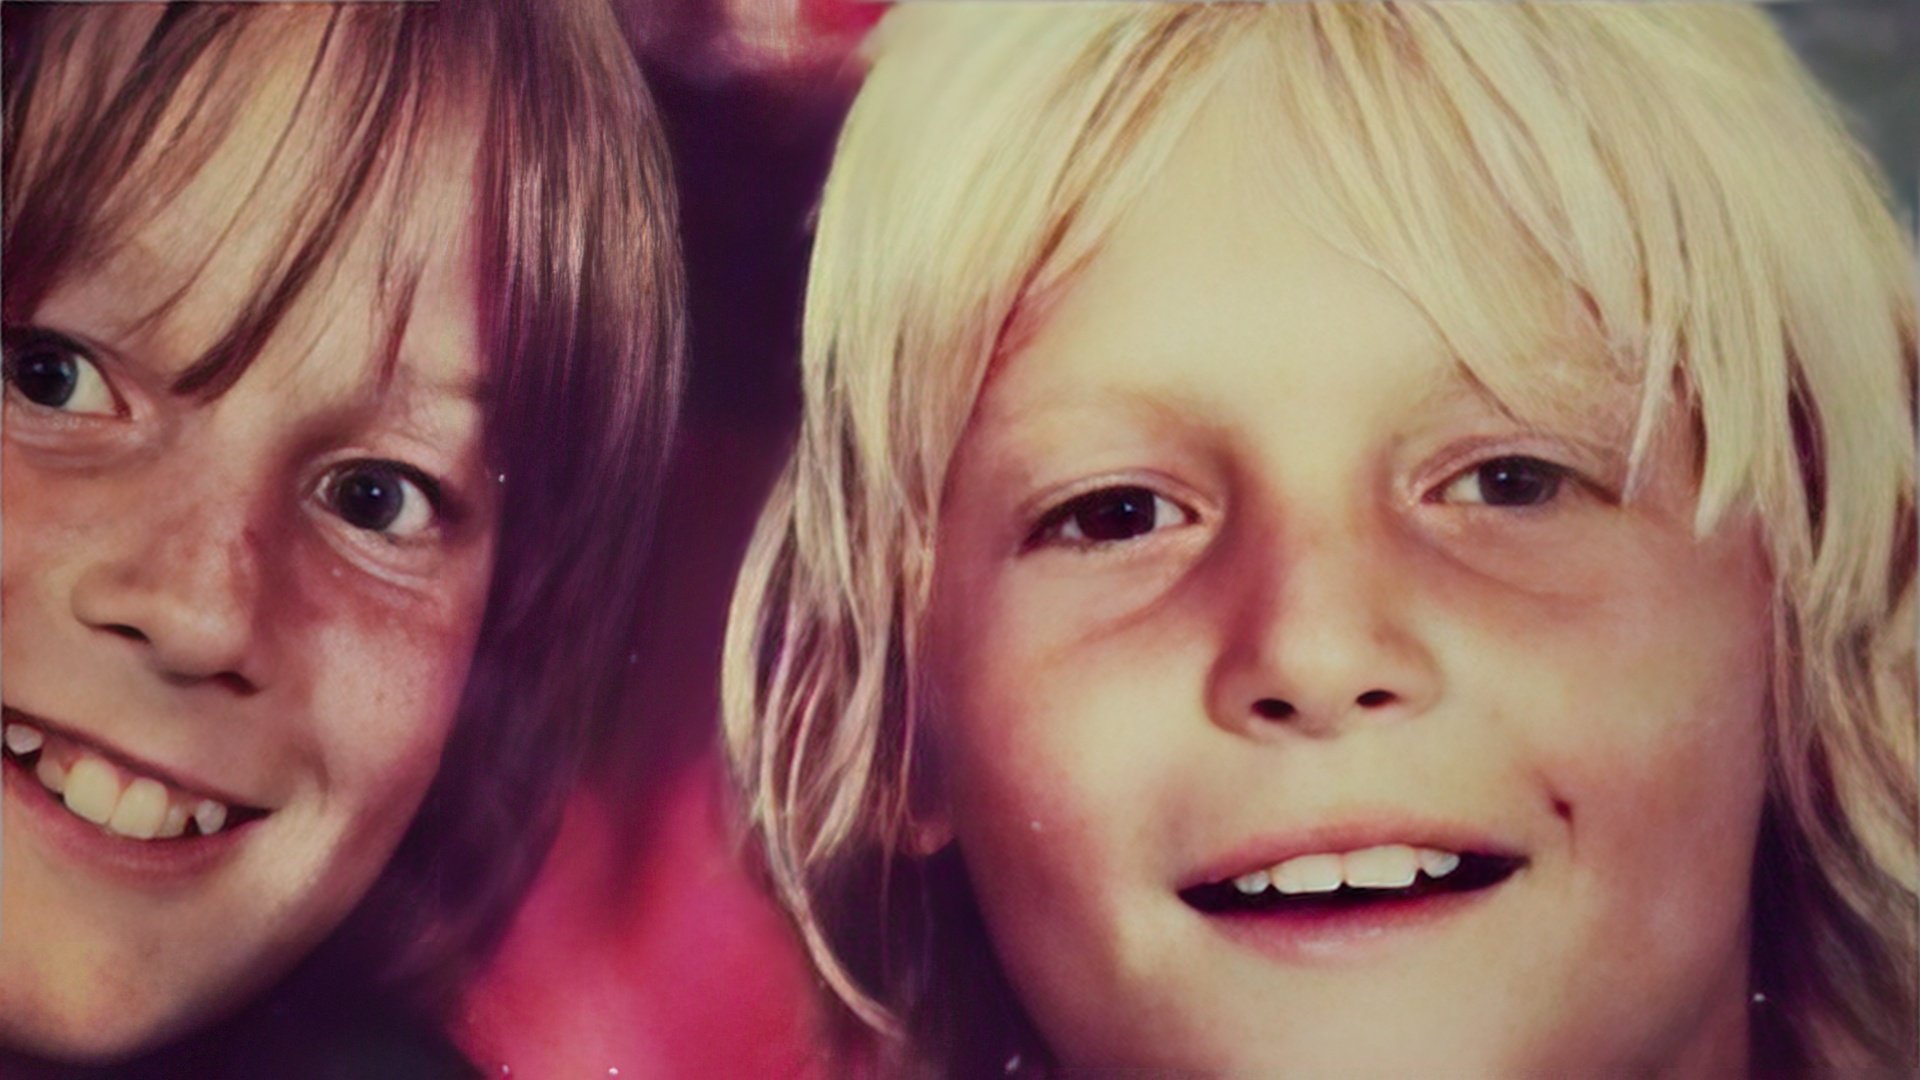 Little Norman Reedus (on the right)